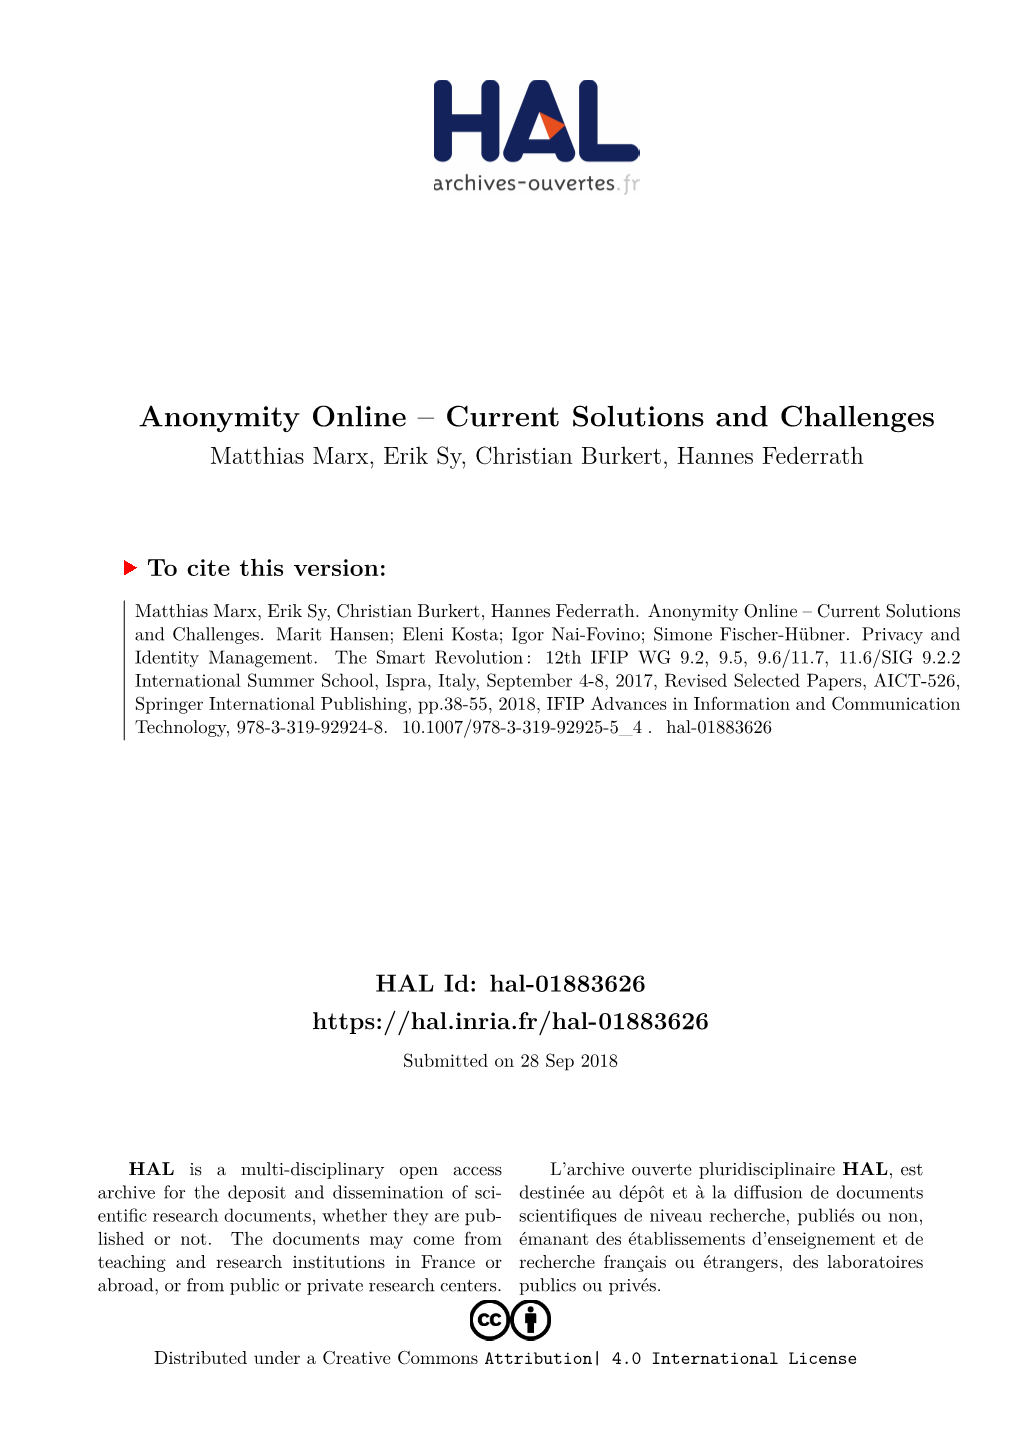 Anonymity Online – Current Solutions and Challenges Matthias Marx, Erik Sy, Christian Burkert, Hannes Federrath